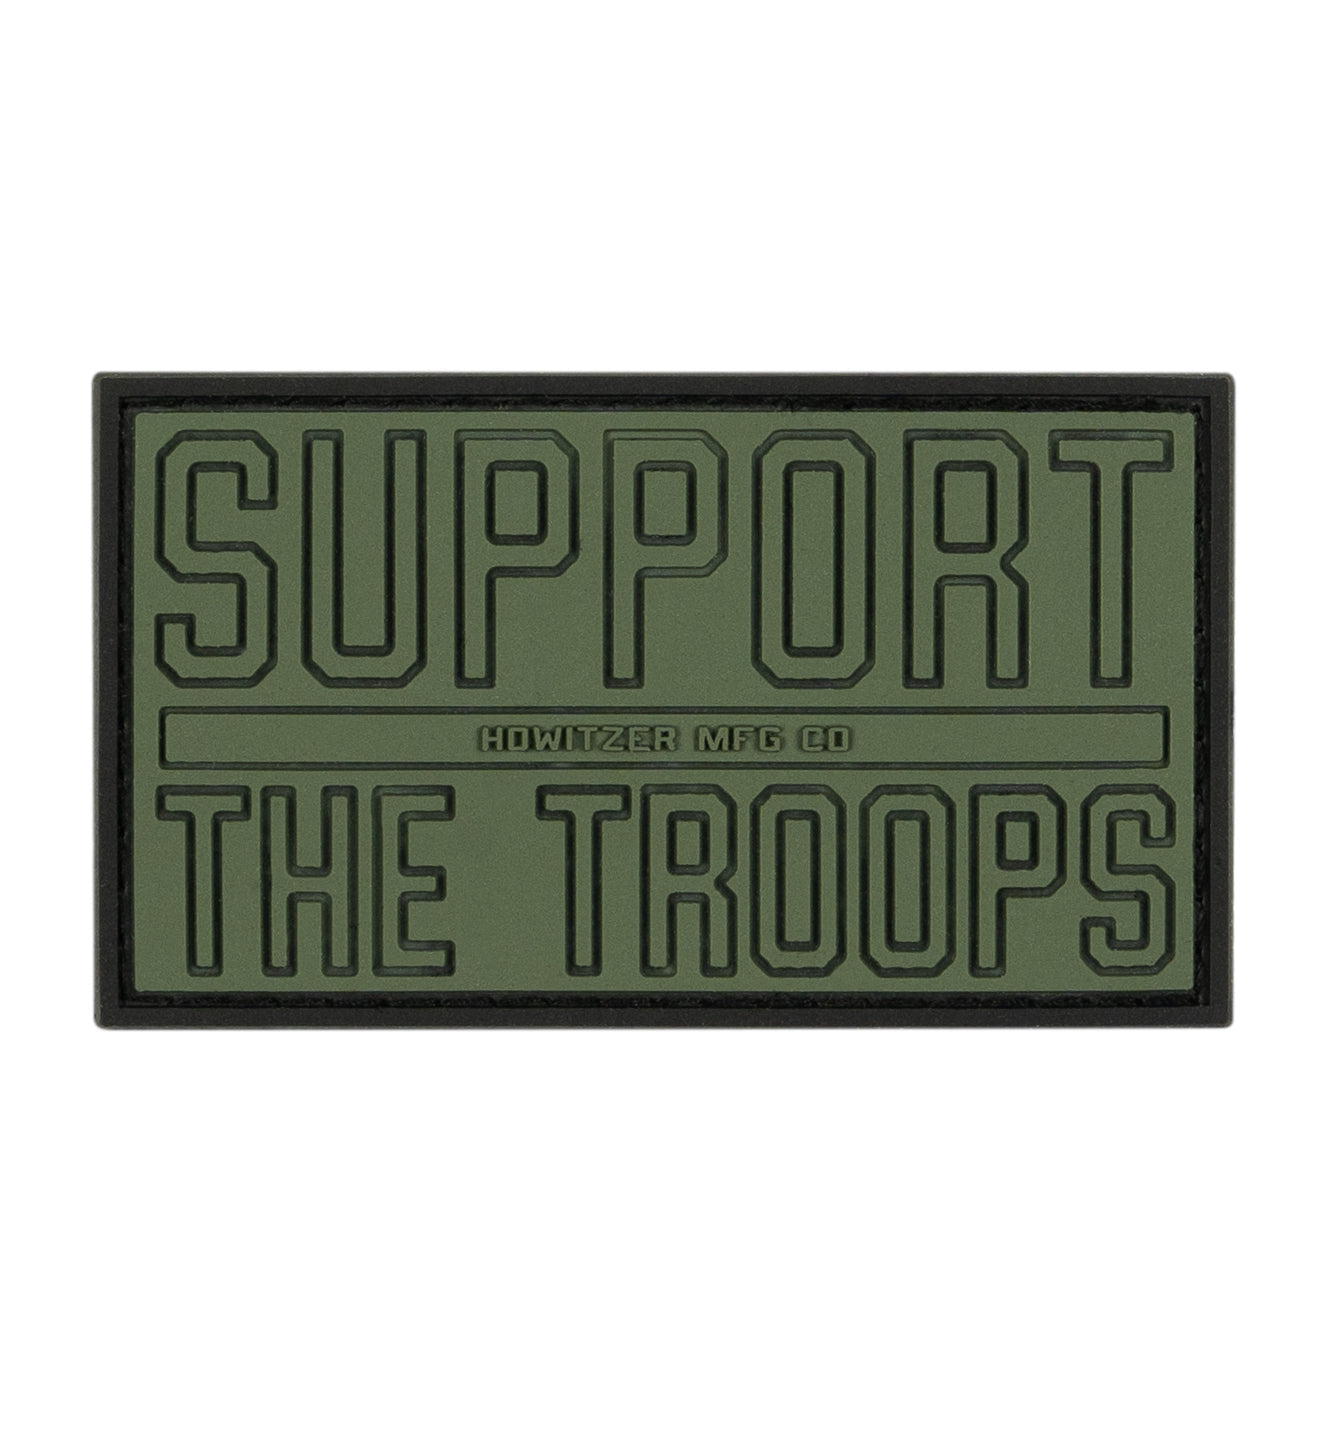 Accessories - Support The Troops Morale Ptch